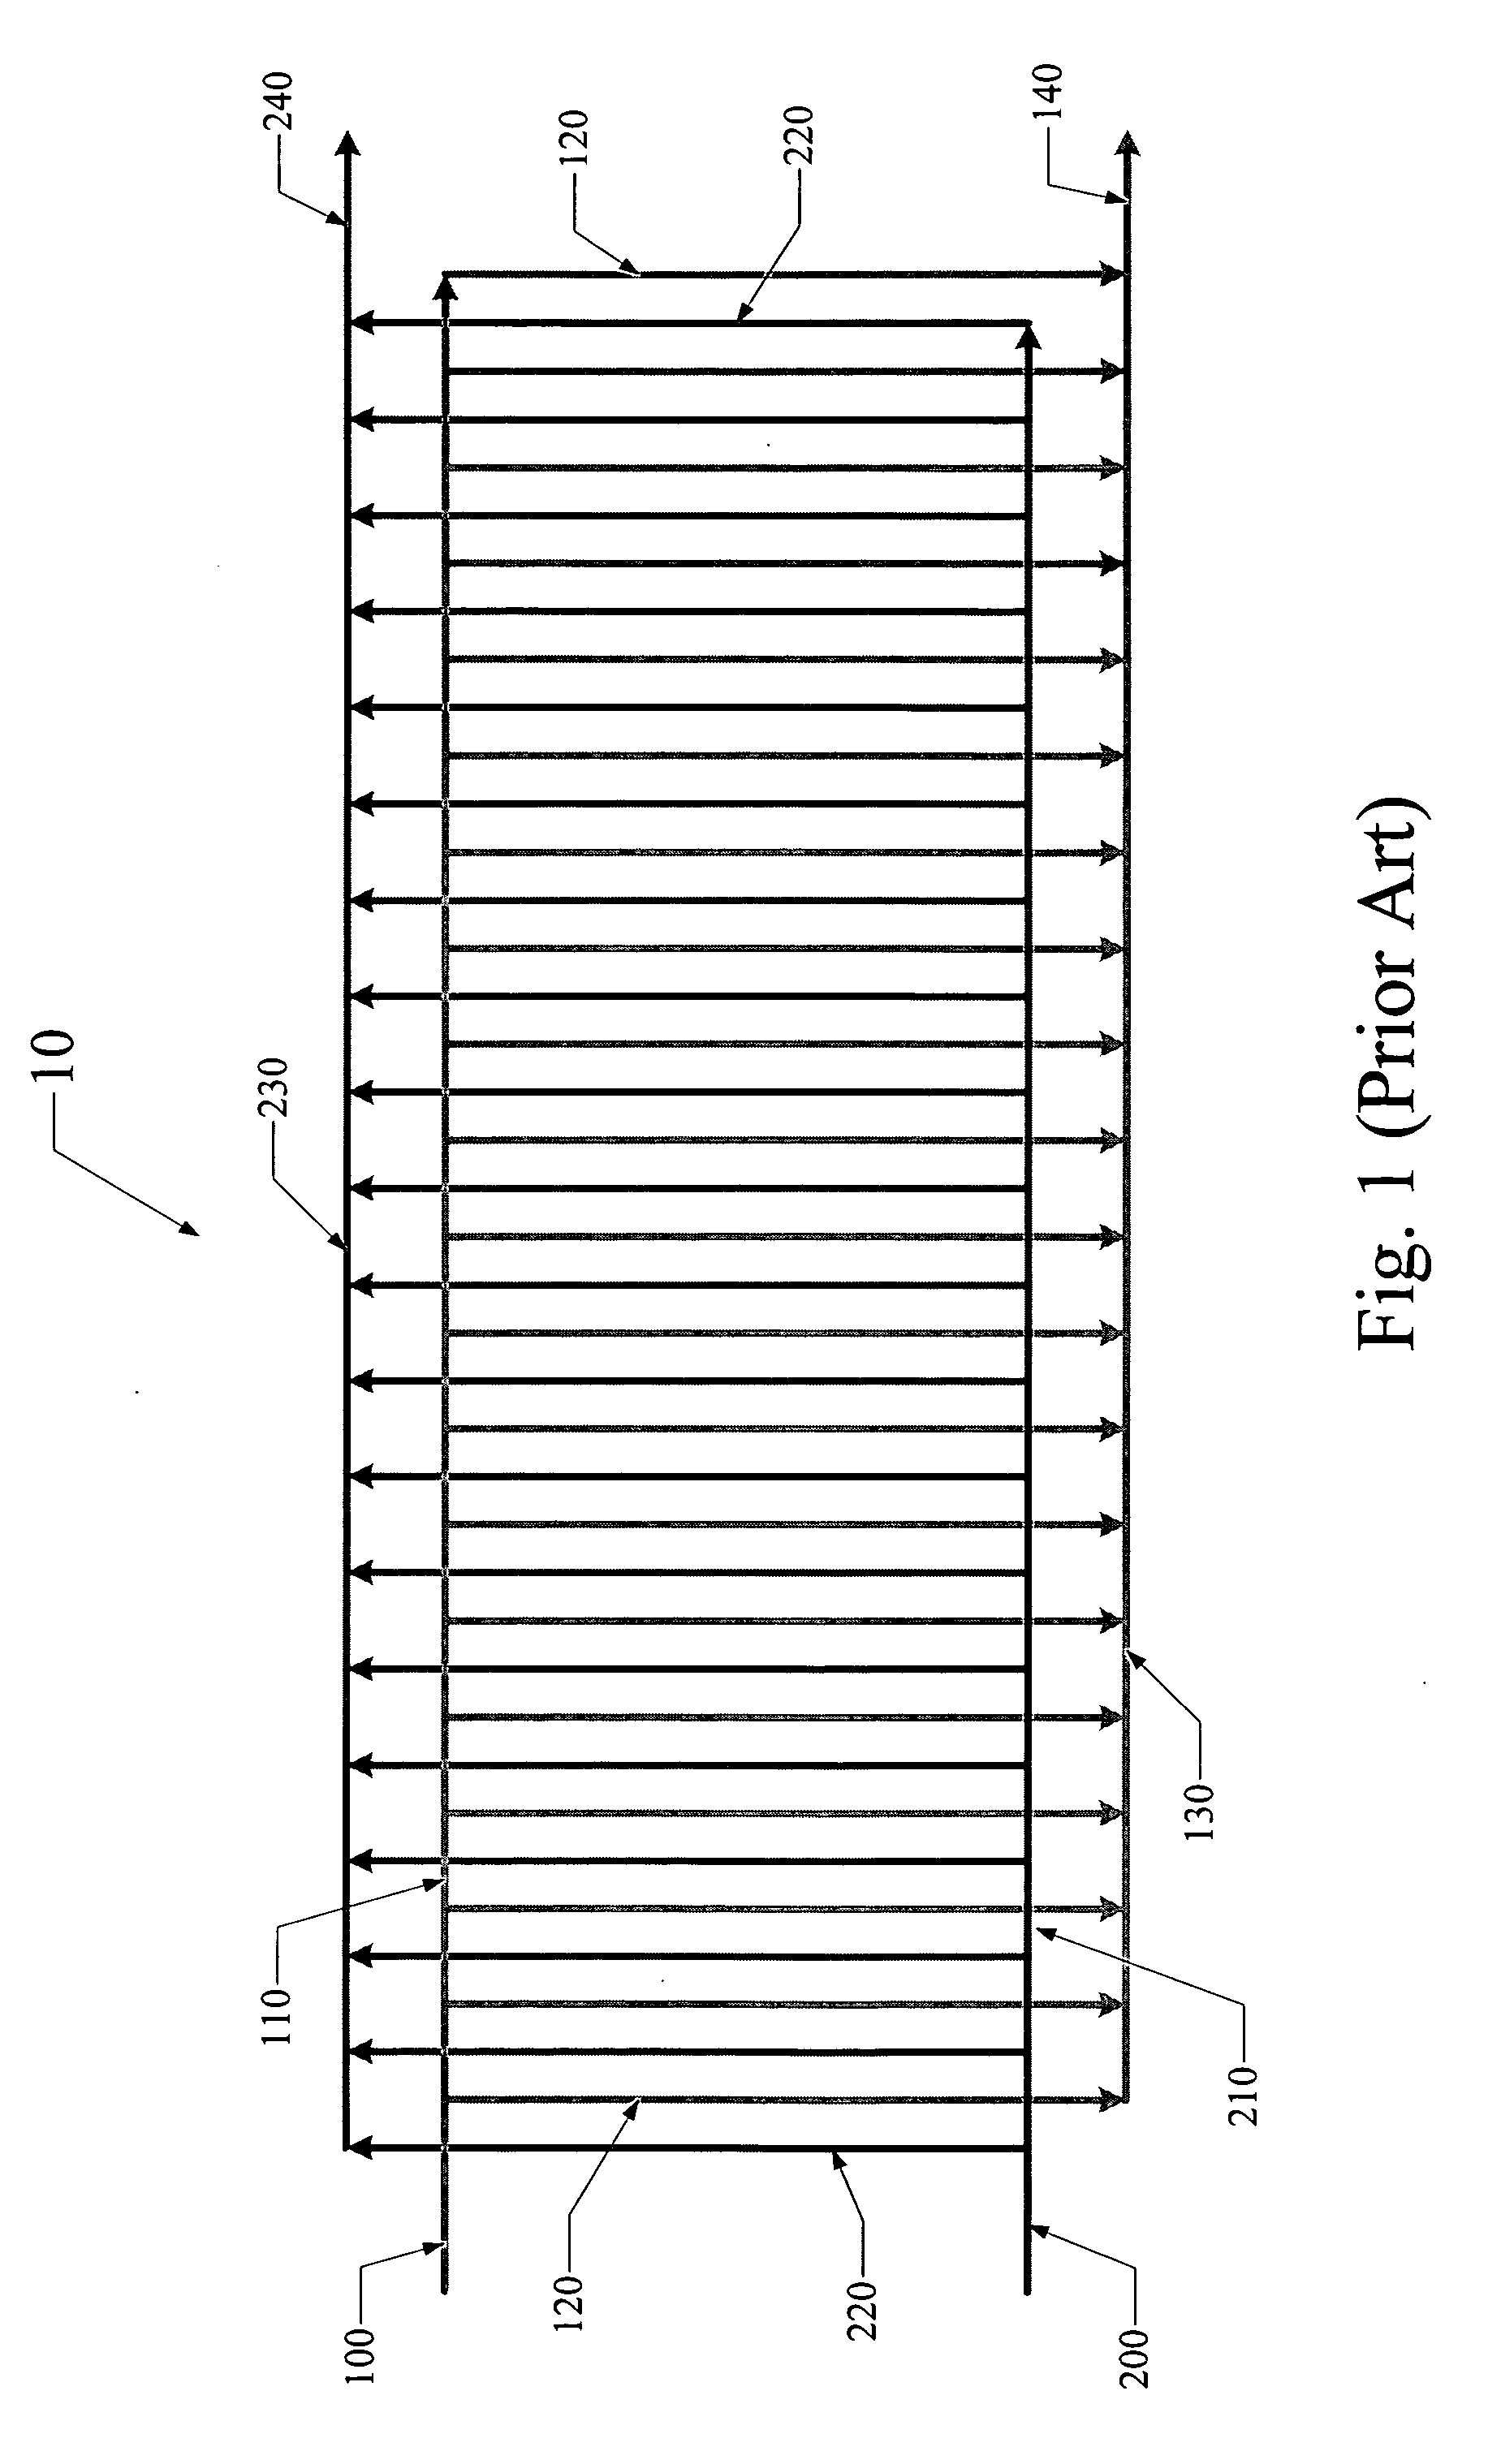 Fuel cell stack with multiple groups of cells and flow passes